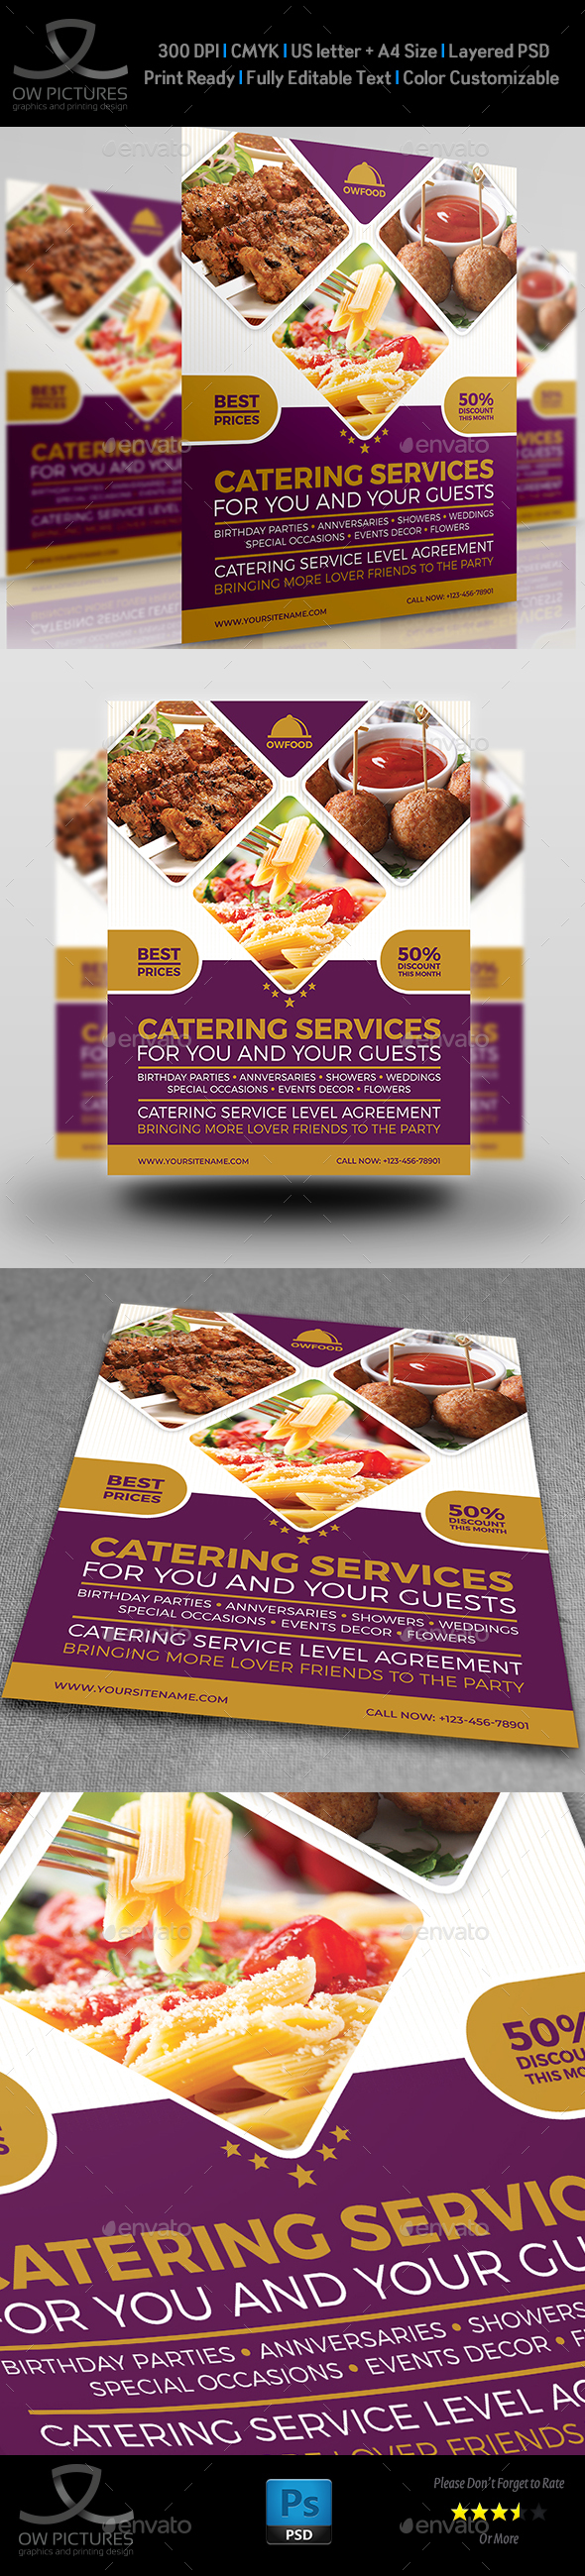 Catering Food Services Flyer Template